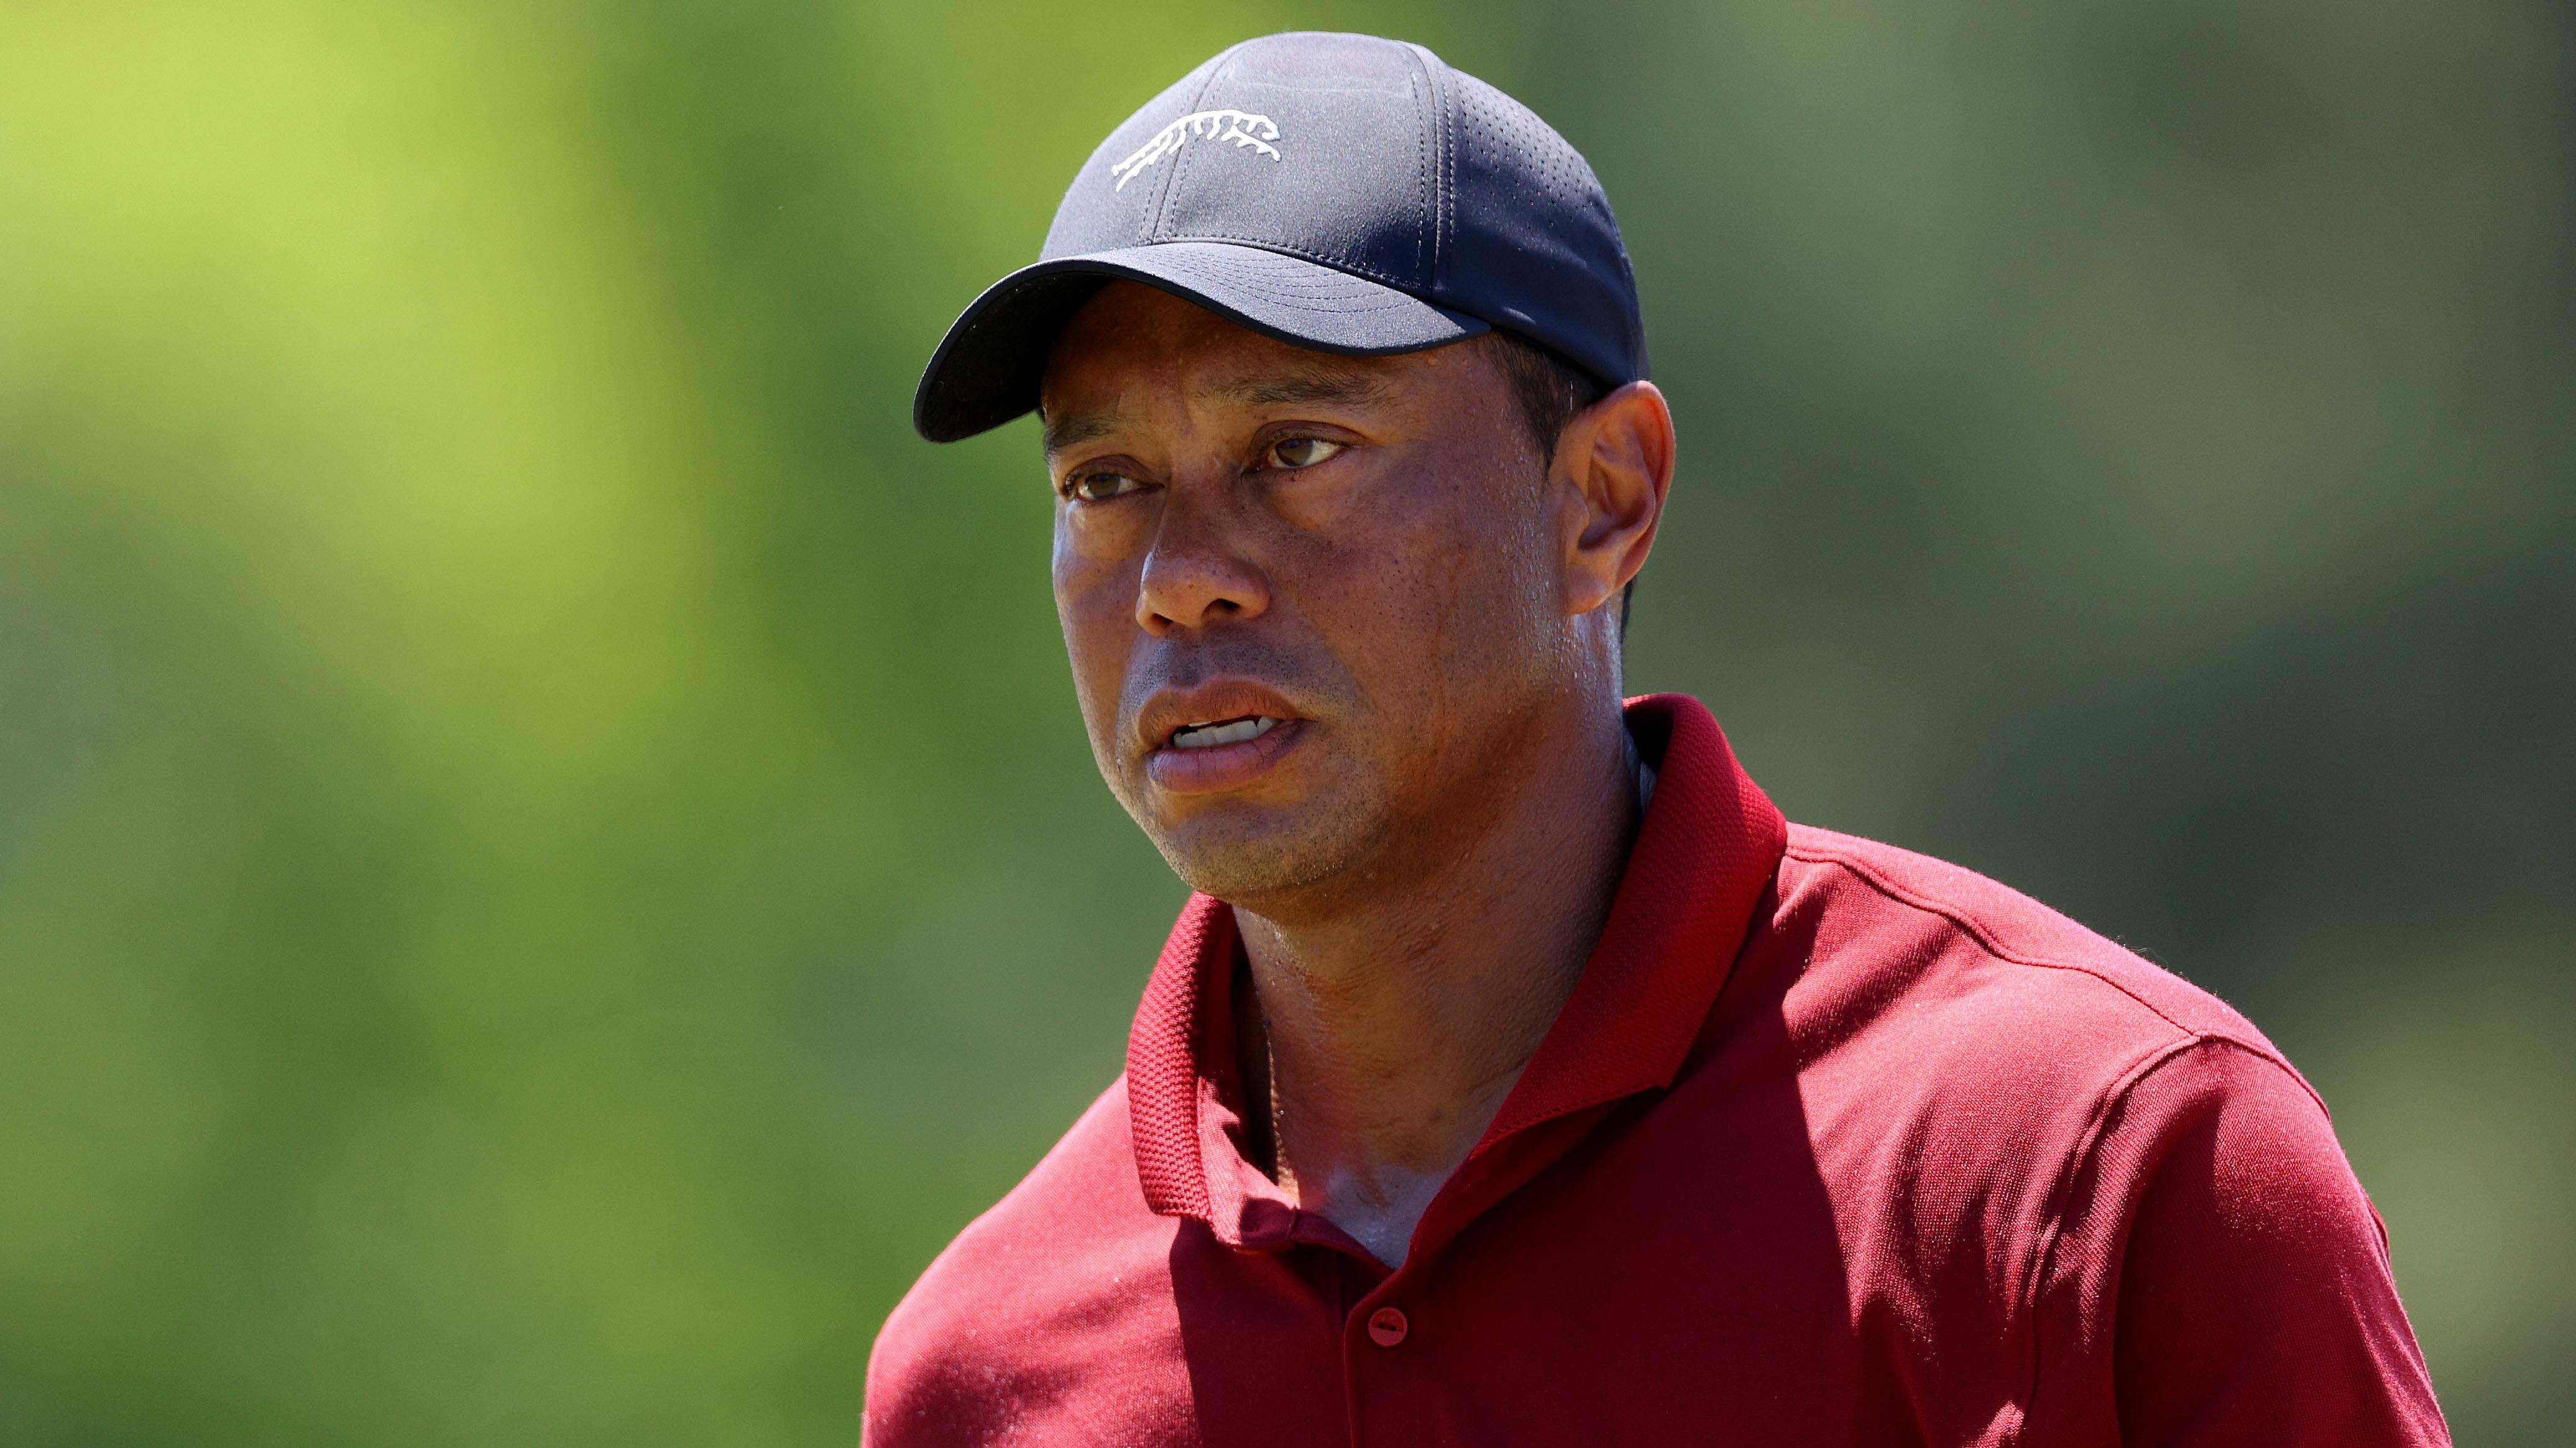 Tiger Woods finishes Masters at 16-over 304, his highest score as a
professional